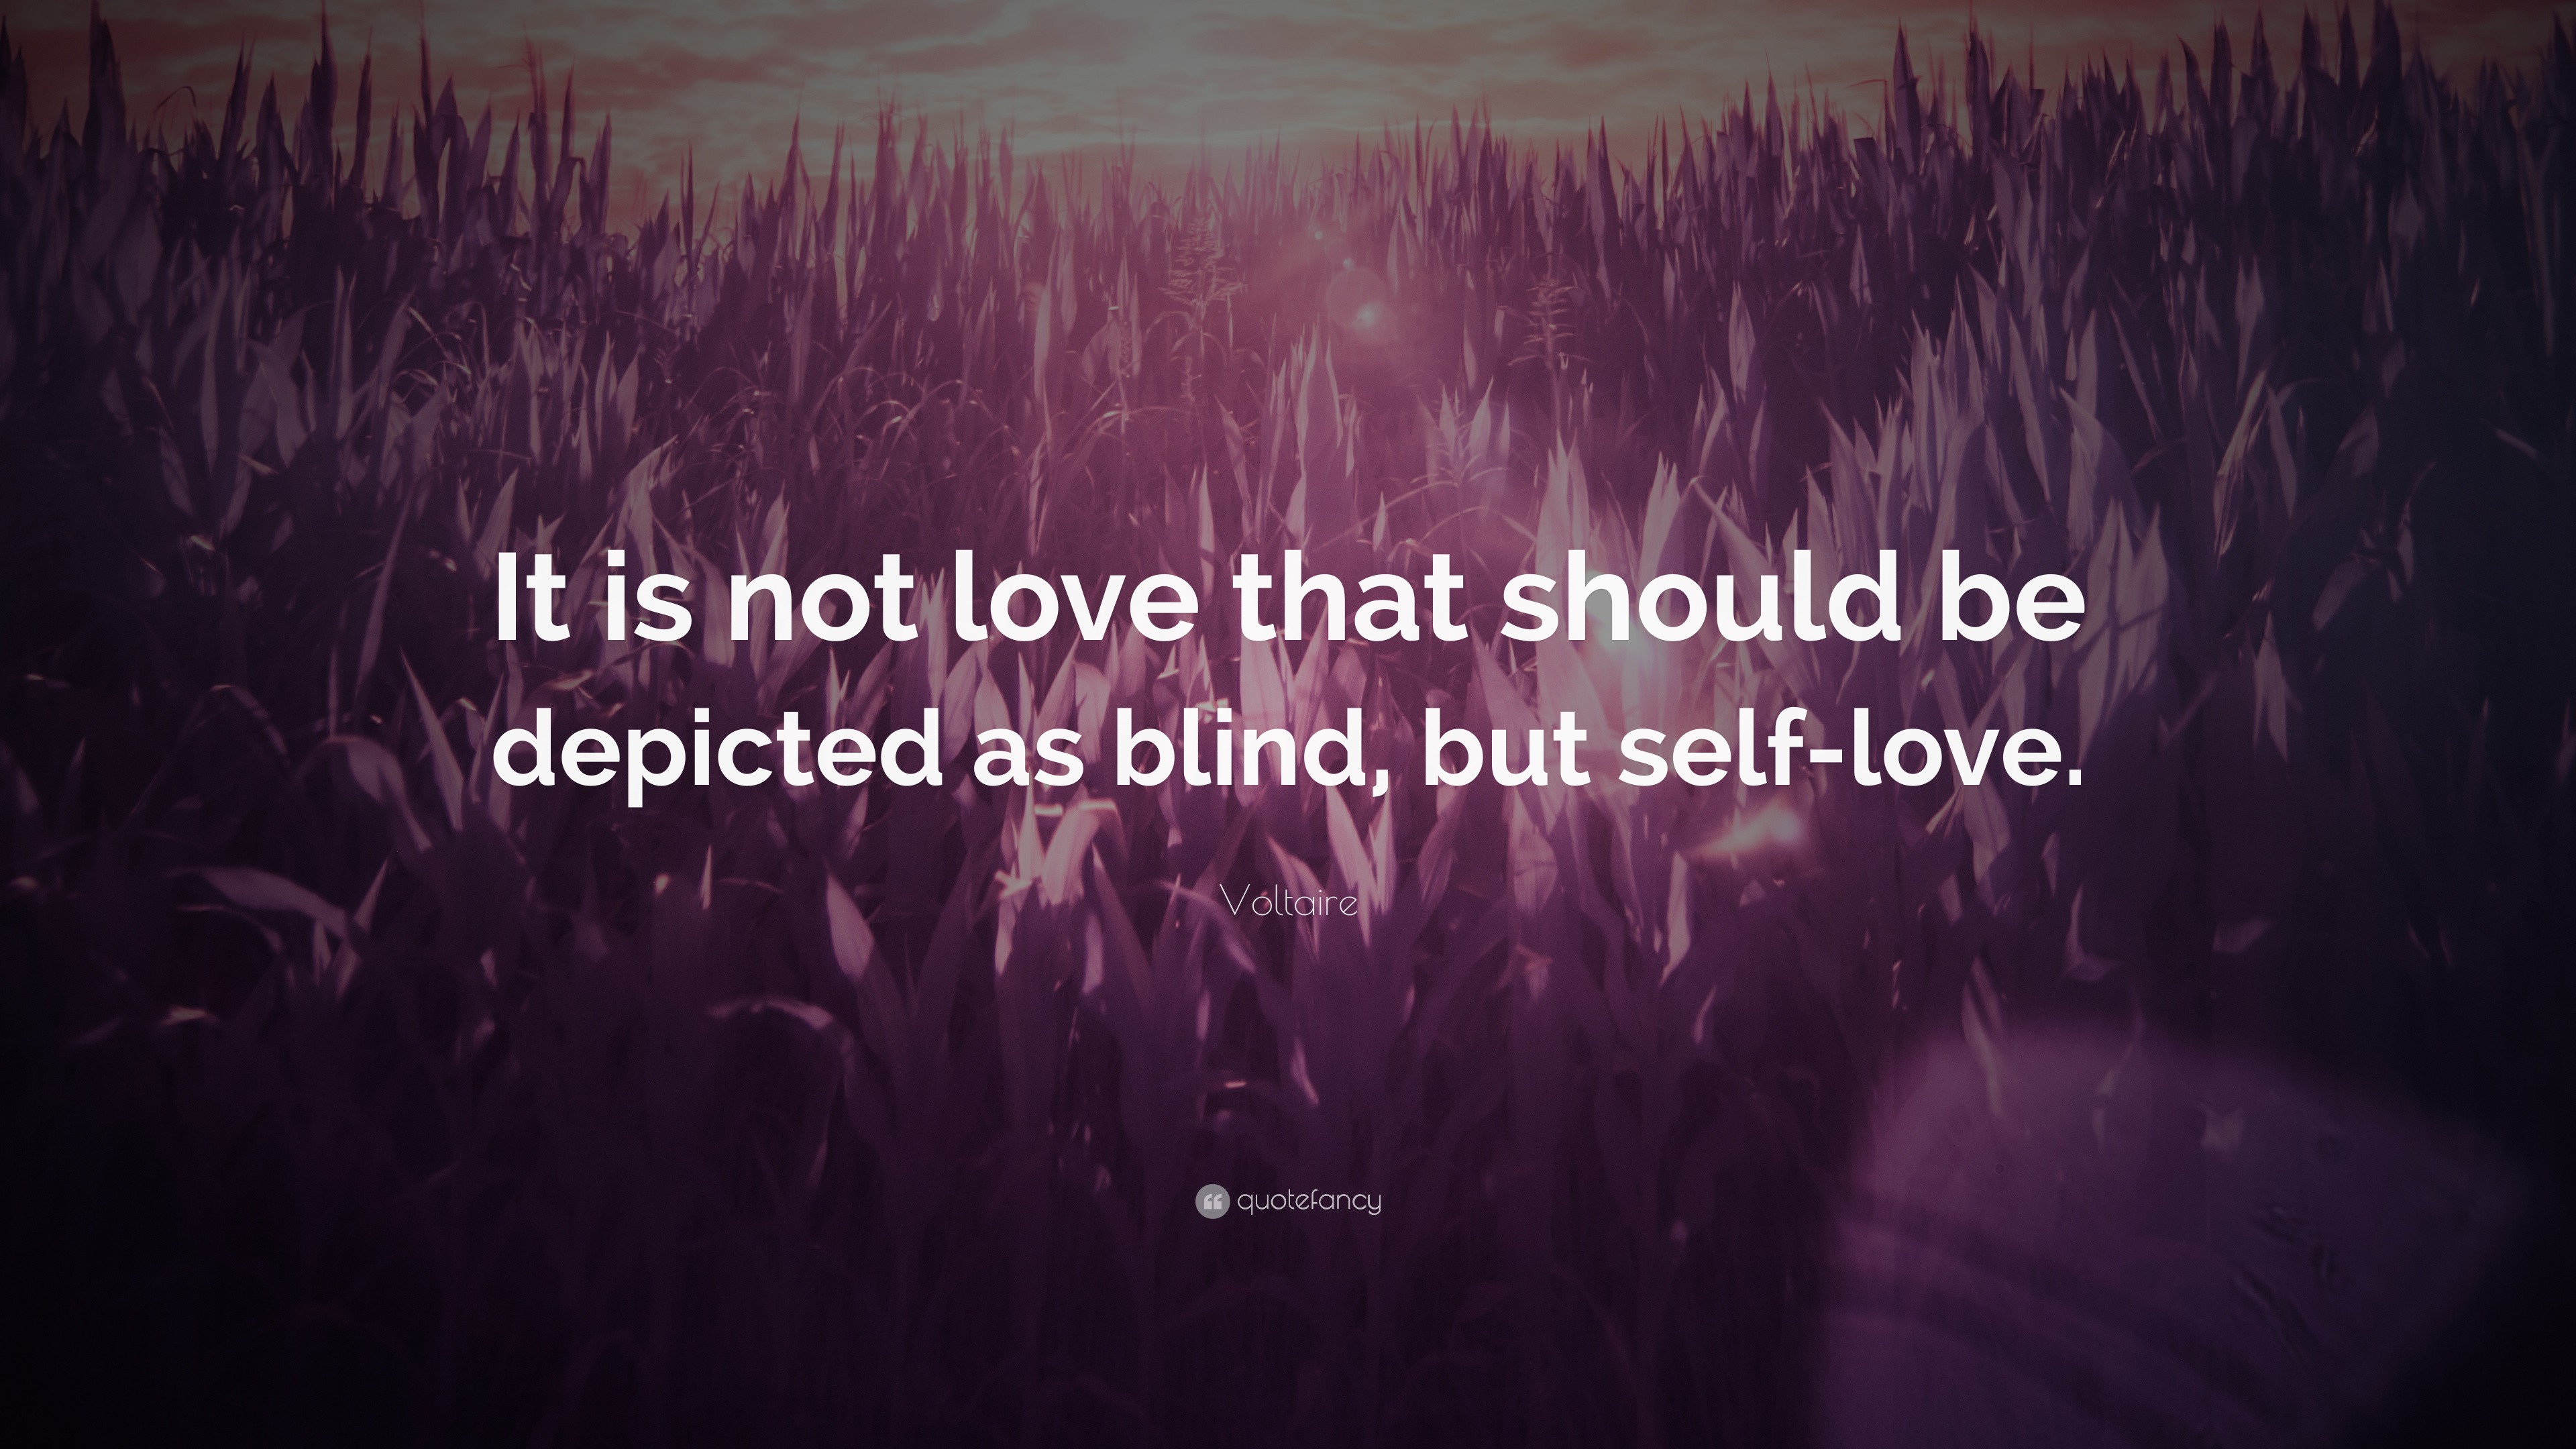 Voltaire Quote: “It is not love that should be depicted as blind, but ...